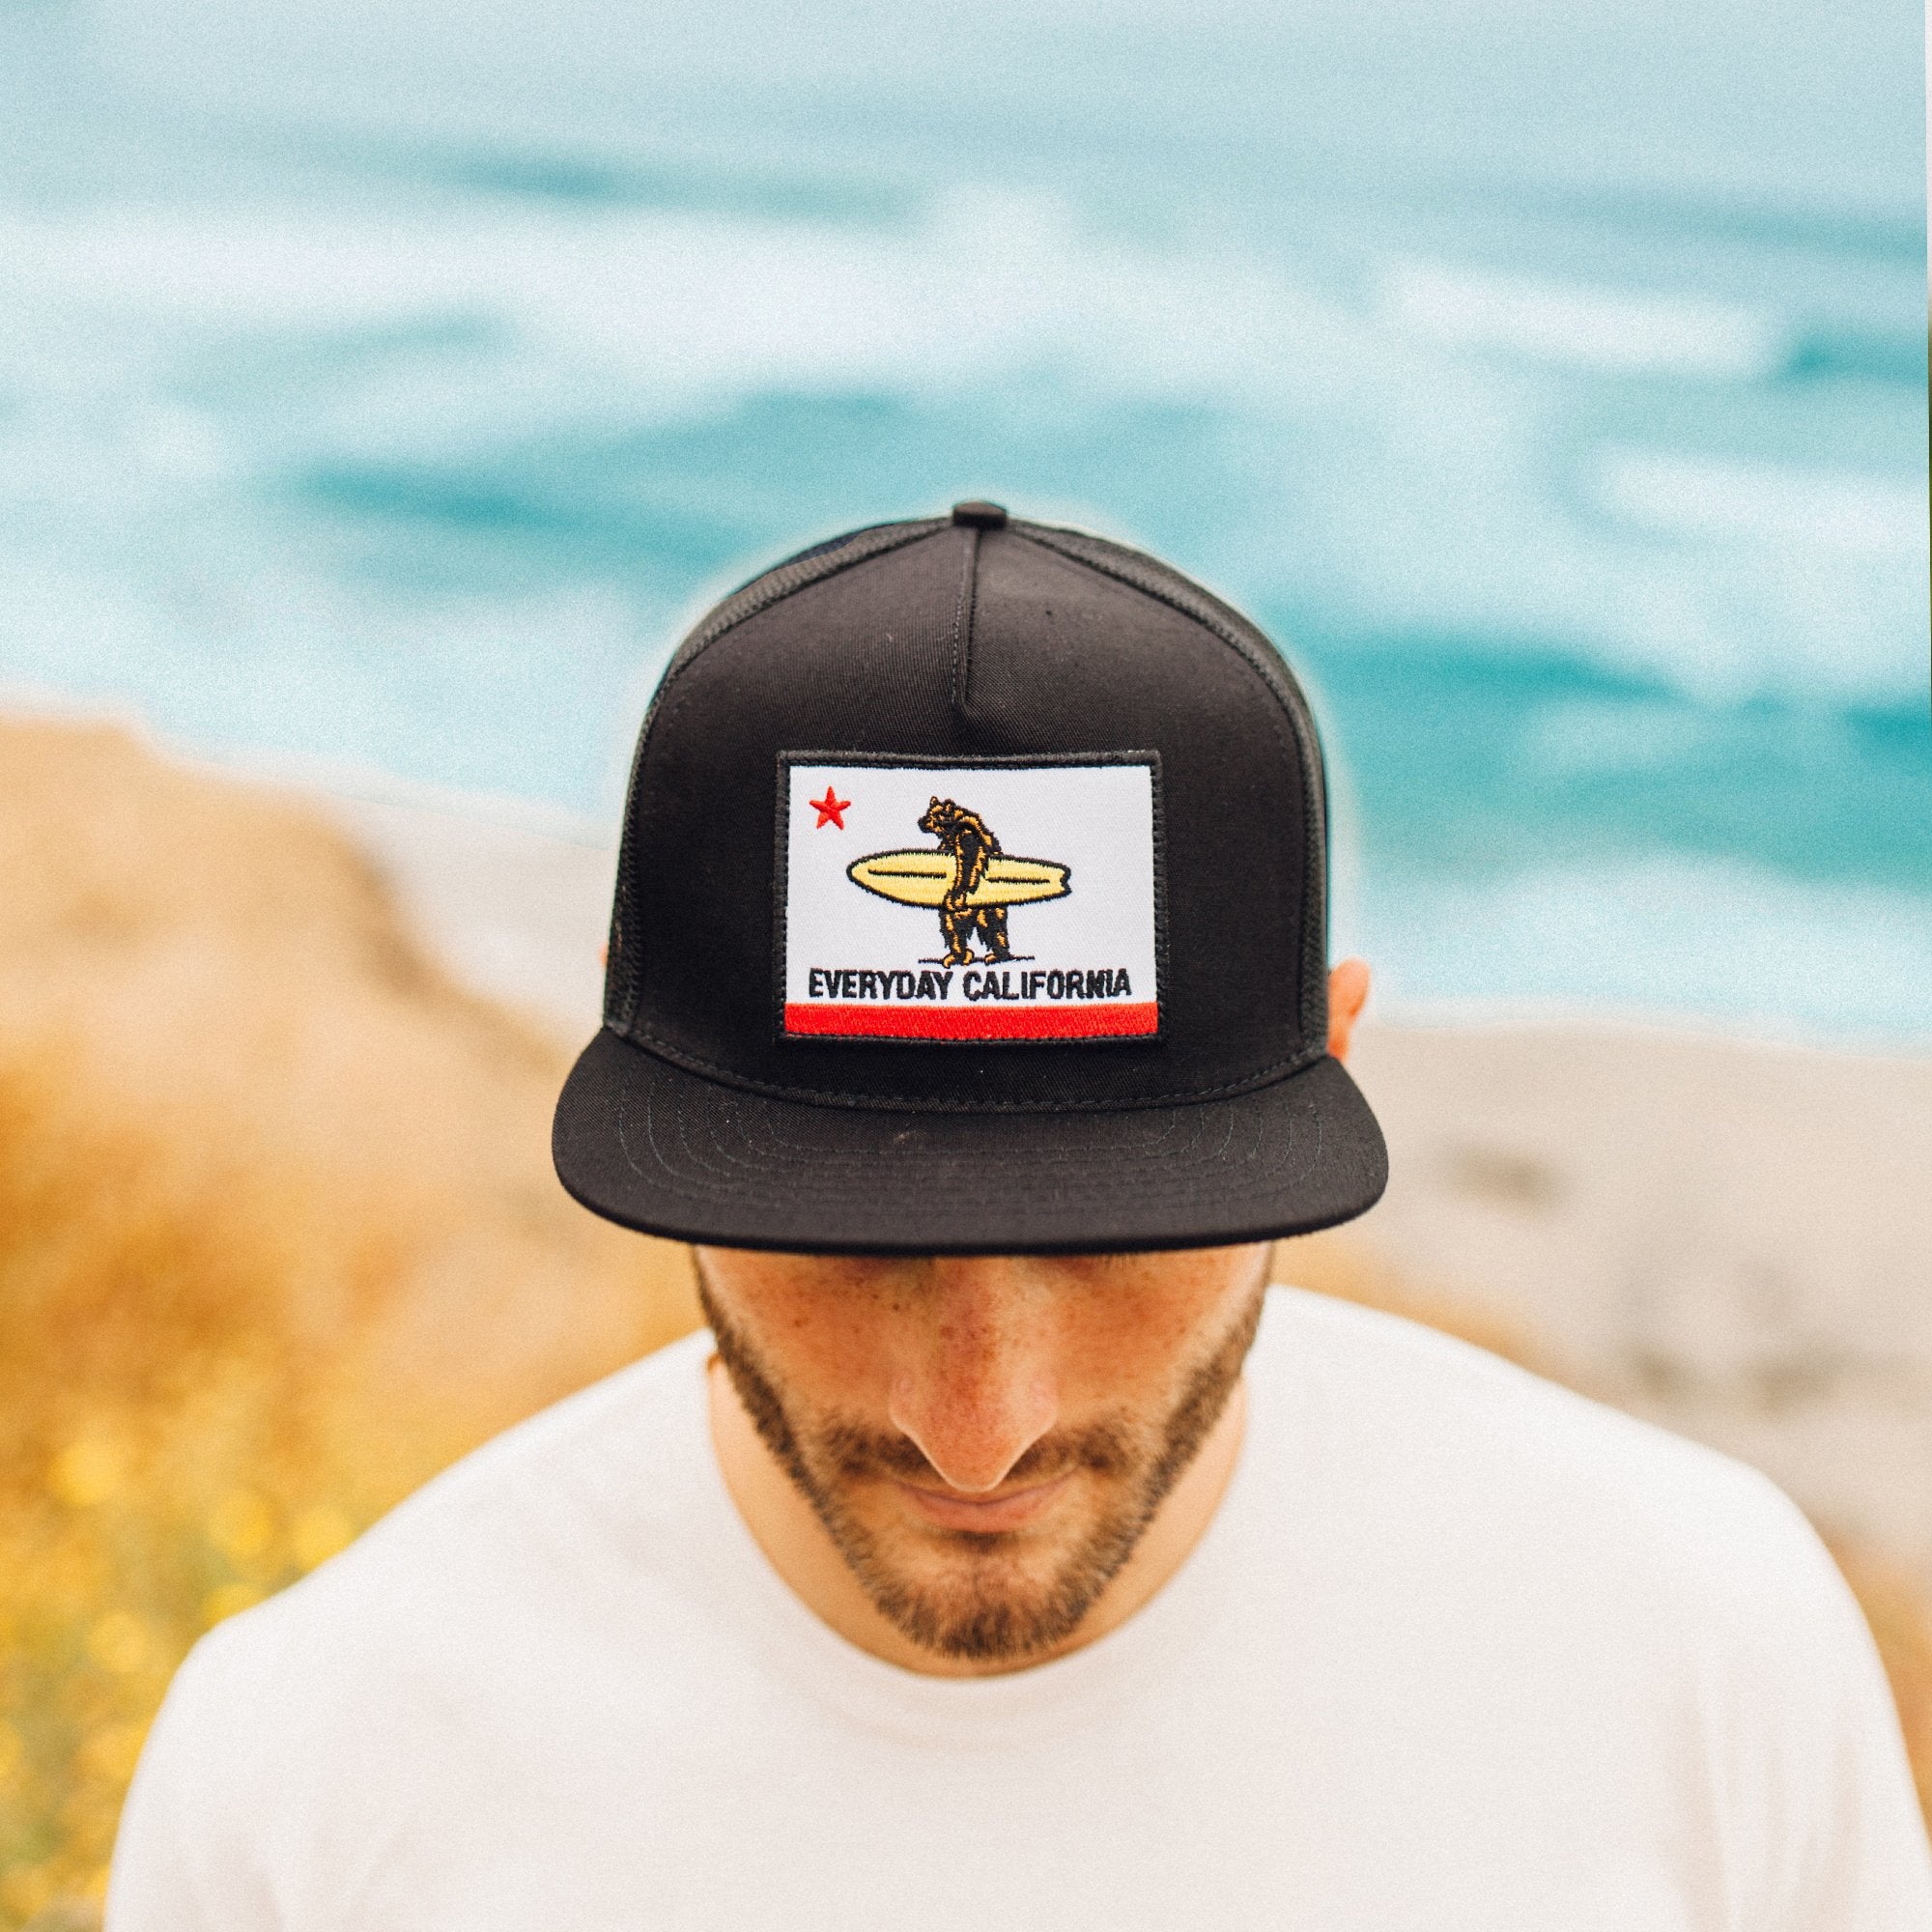 The California flag, reimagined. The Shores is a surfers' classic with our signature flag patch on a baseball cap design. Pure and simple California style.  Details:  Classic Everyday California Flag patch Breathable mesh backing Retro style has a curved brim Classic style has a flat brim  This hat supports ocean conservation & sustainability.  Our Shores Snapback is just the right size for most heads. 